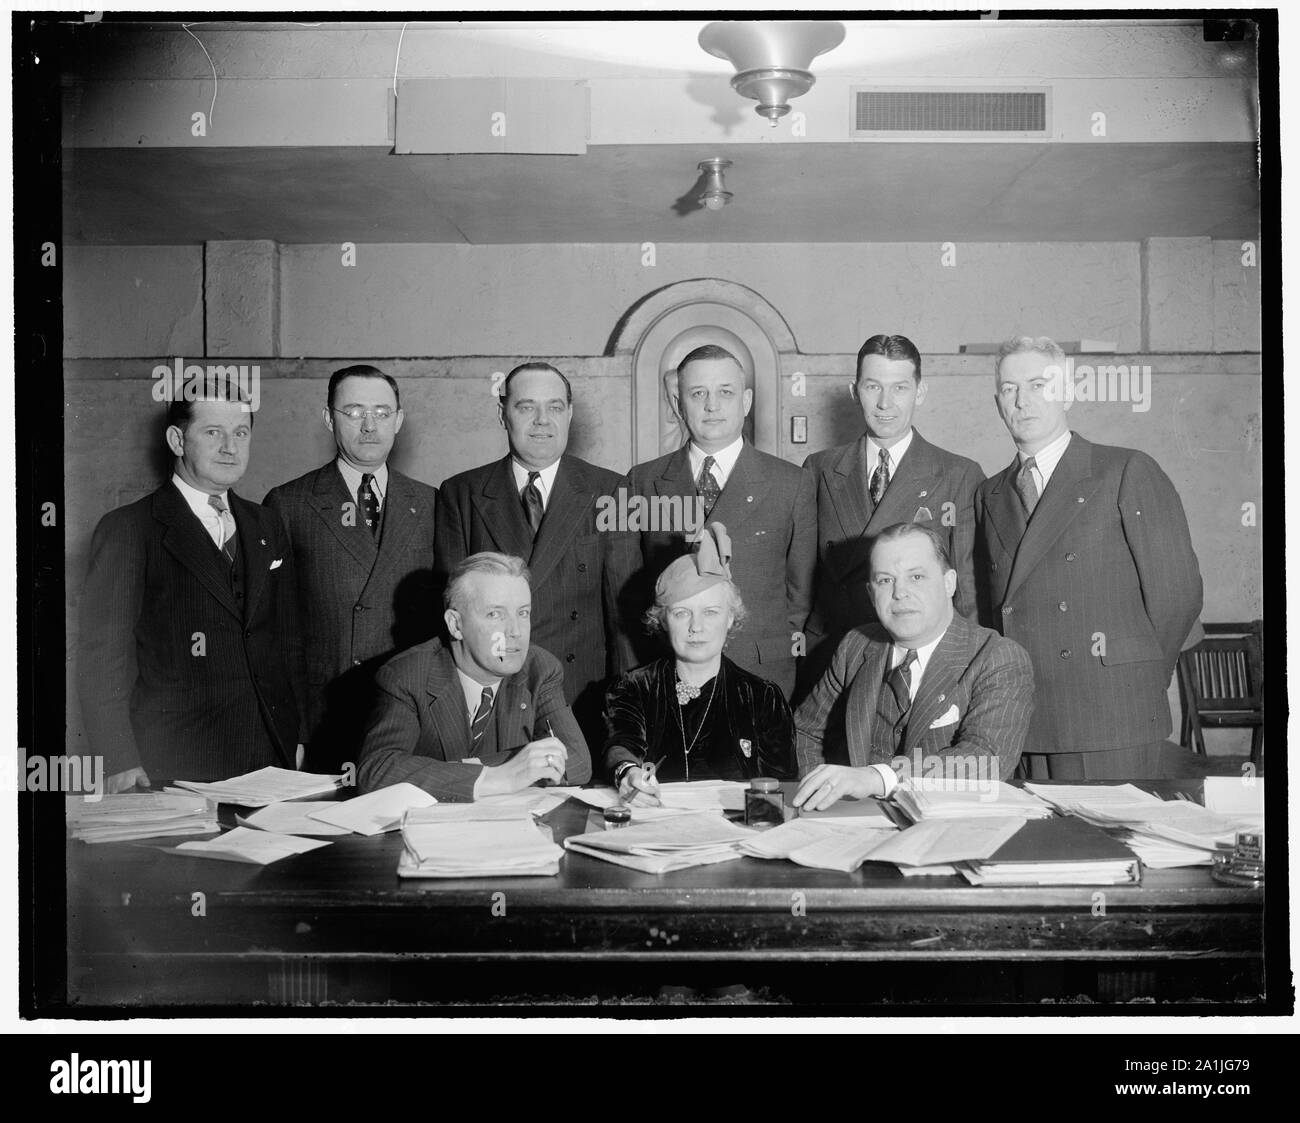 National Veteran's Employment Committee of the American Legion. Seated, L-R: Jack Crowley of Vermont, Nat'l Chairman of Vet. Emp. Comm.; Mrs. Ada Mucklestone of Ill., National Chairman of the American Legion Auxiliary; Paul H. Griffith, (D.C.), National Director of Re-Employment. Standing, L-R: [...], F. Regan of N.J.; Wm. D. Reilly of Kansas; Roy S. Stockton of California; Spencer Boise of North Dakota; James W. Hammond of Kentucky; Harold P. Redden of Massachusetts. Attending conferences at the Hamilton Hotel about securing employment for World War Veterans Stock Photo